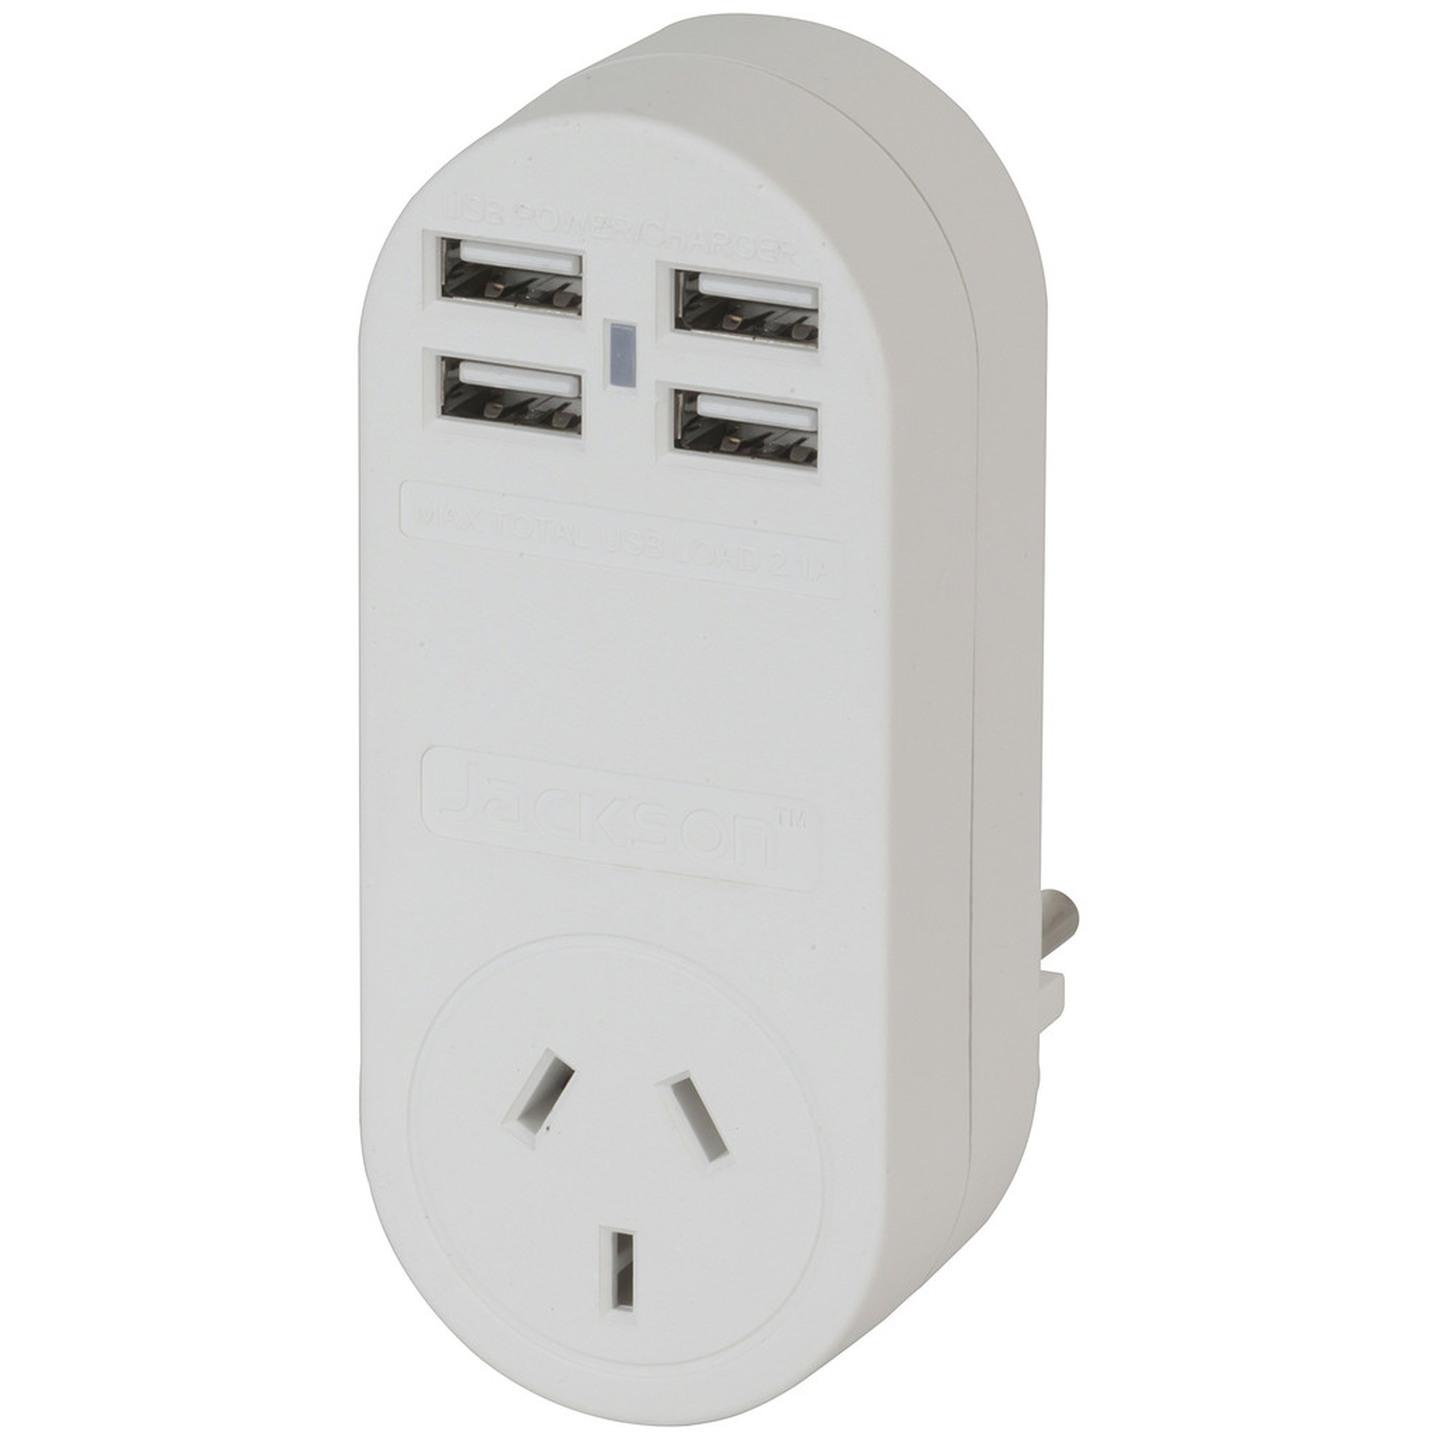 Outbound Europe Travel Mains Adaptor with 4 USB Sockets